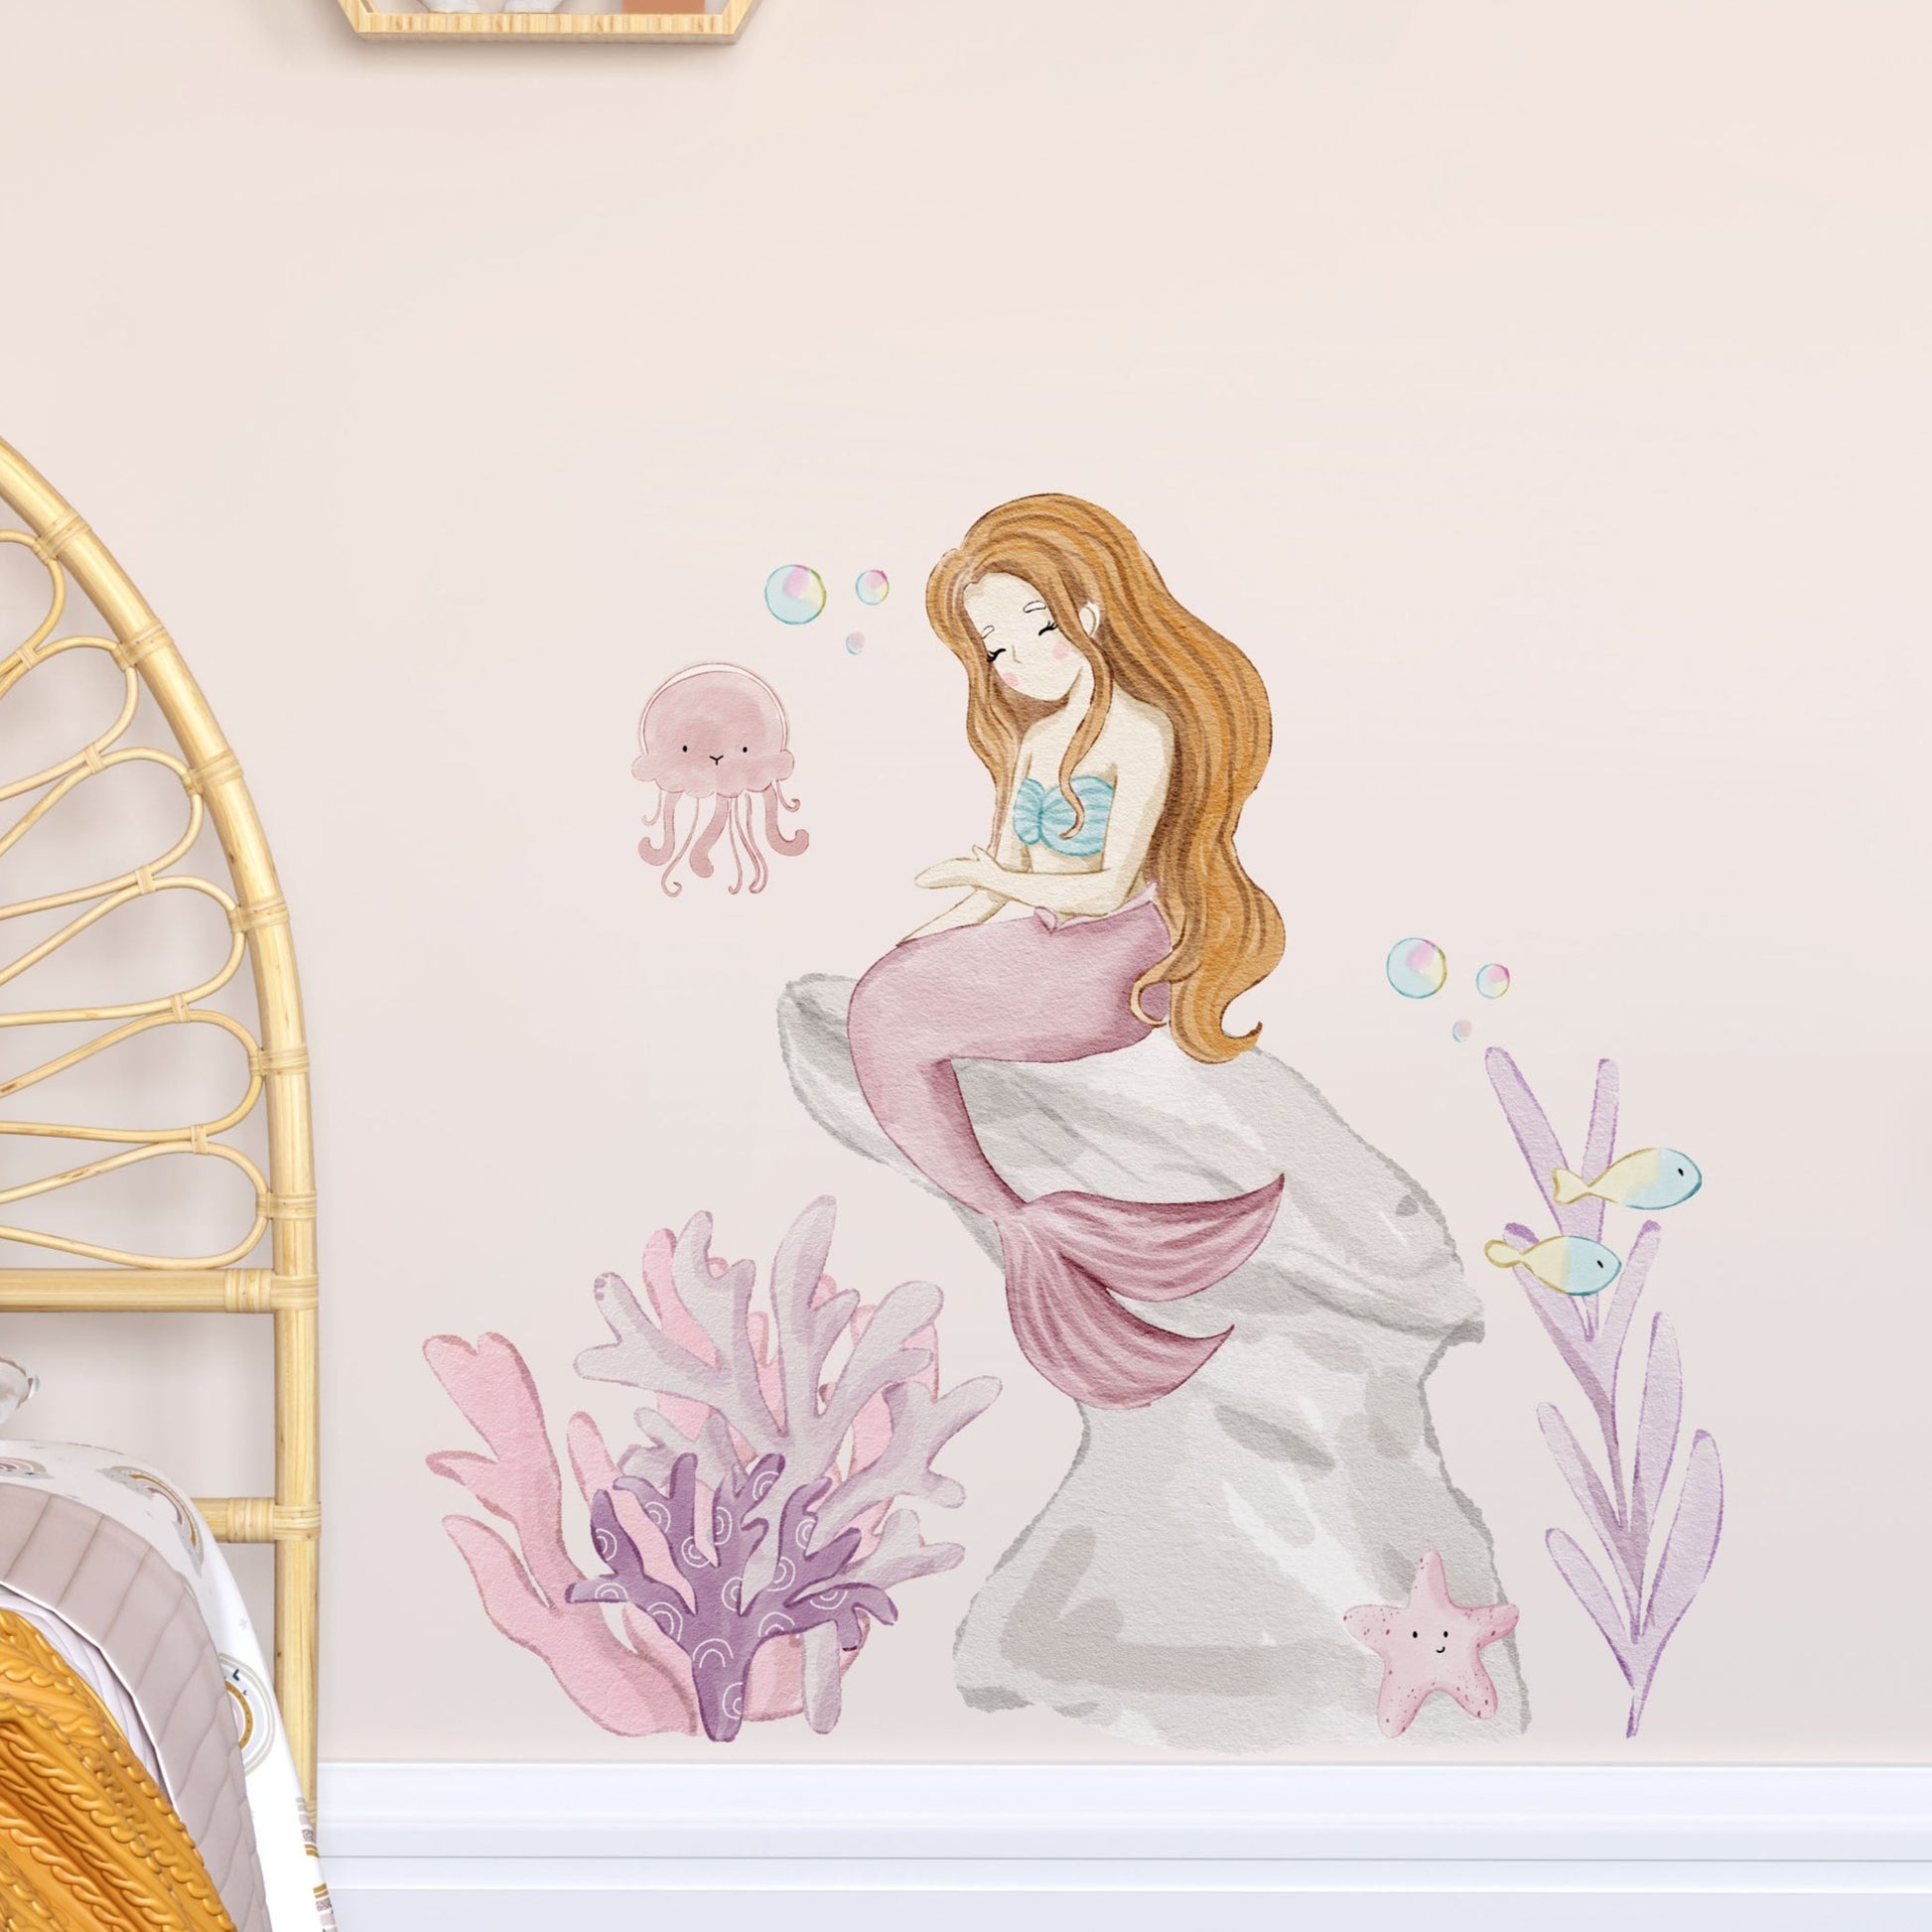 Lucy the Mermaid Wall Decal - Wall Decals - Fable and Fawn 